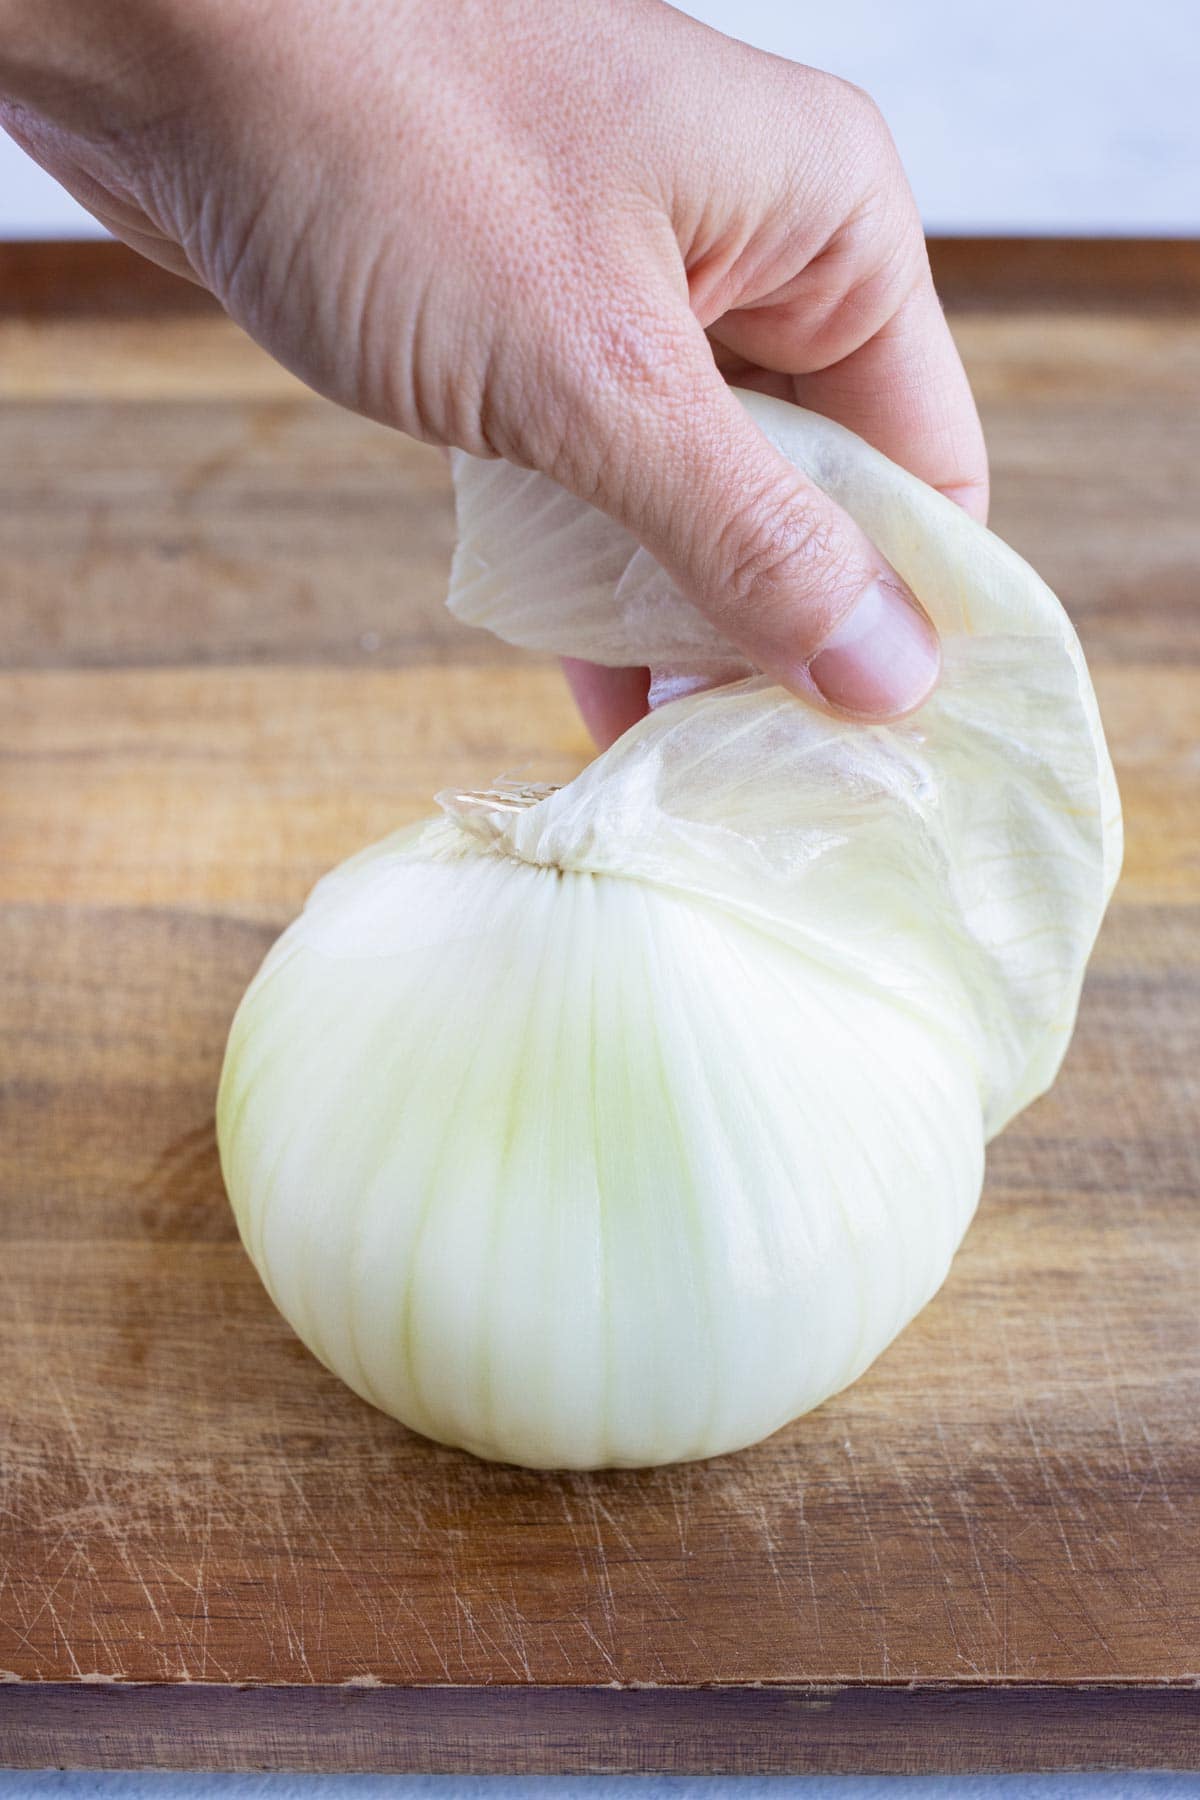 The outside is peeled off of the sweet onion.